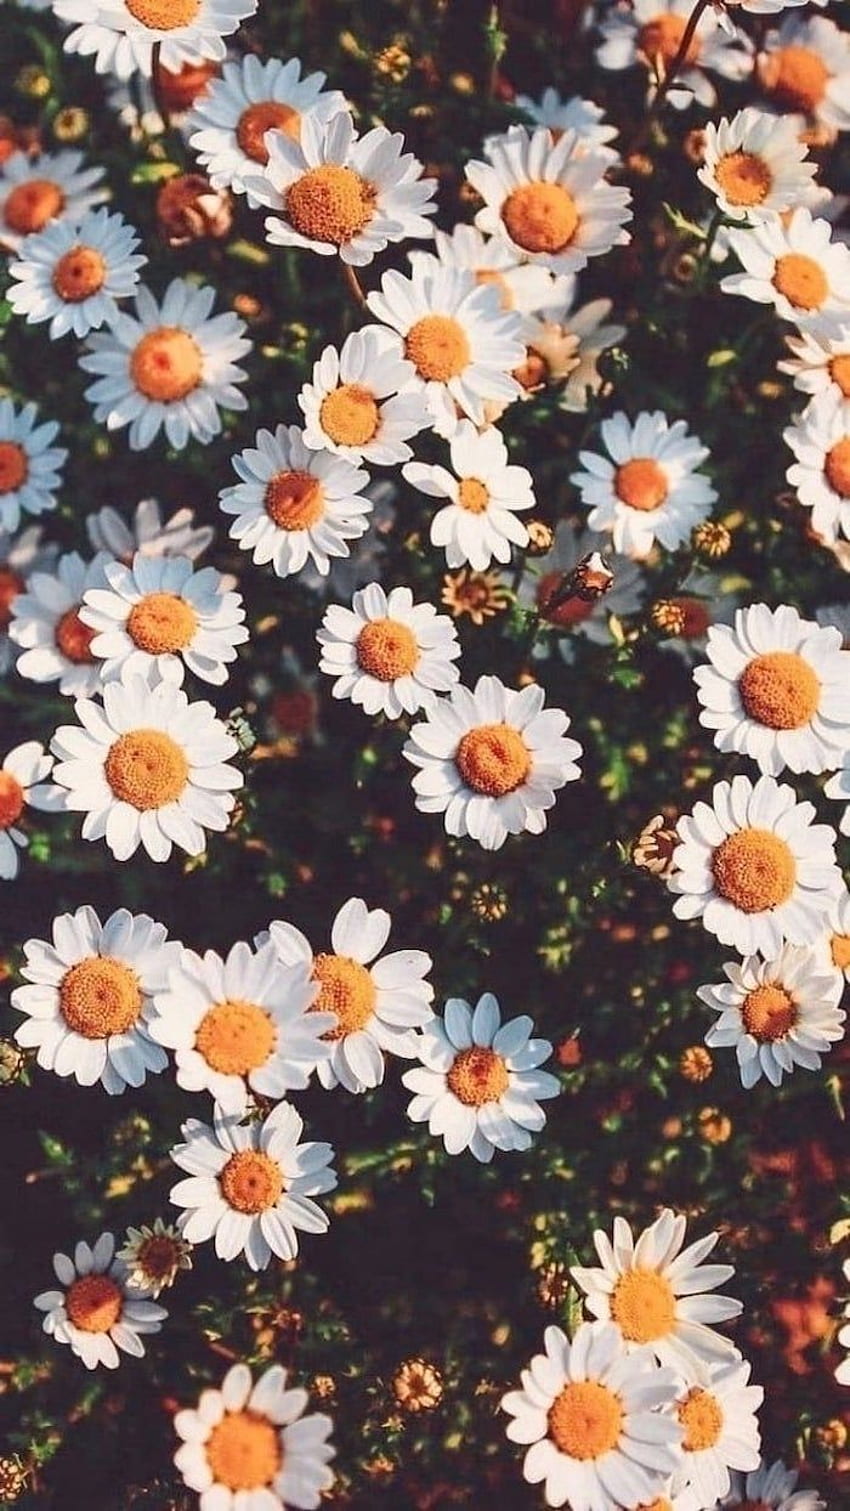 Wallpapers Daisy Phone Images  Free Photos PNG Stickers Wallpapers   Backgrounds  rawpixel